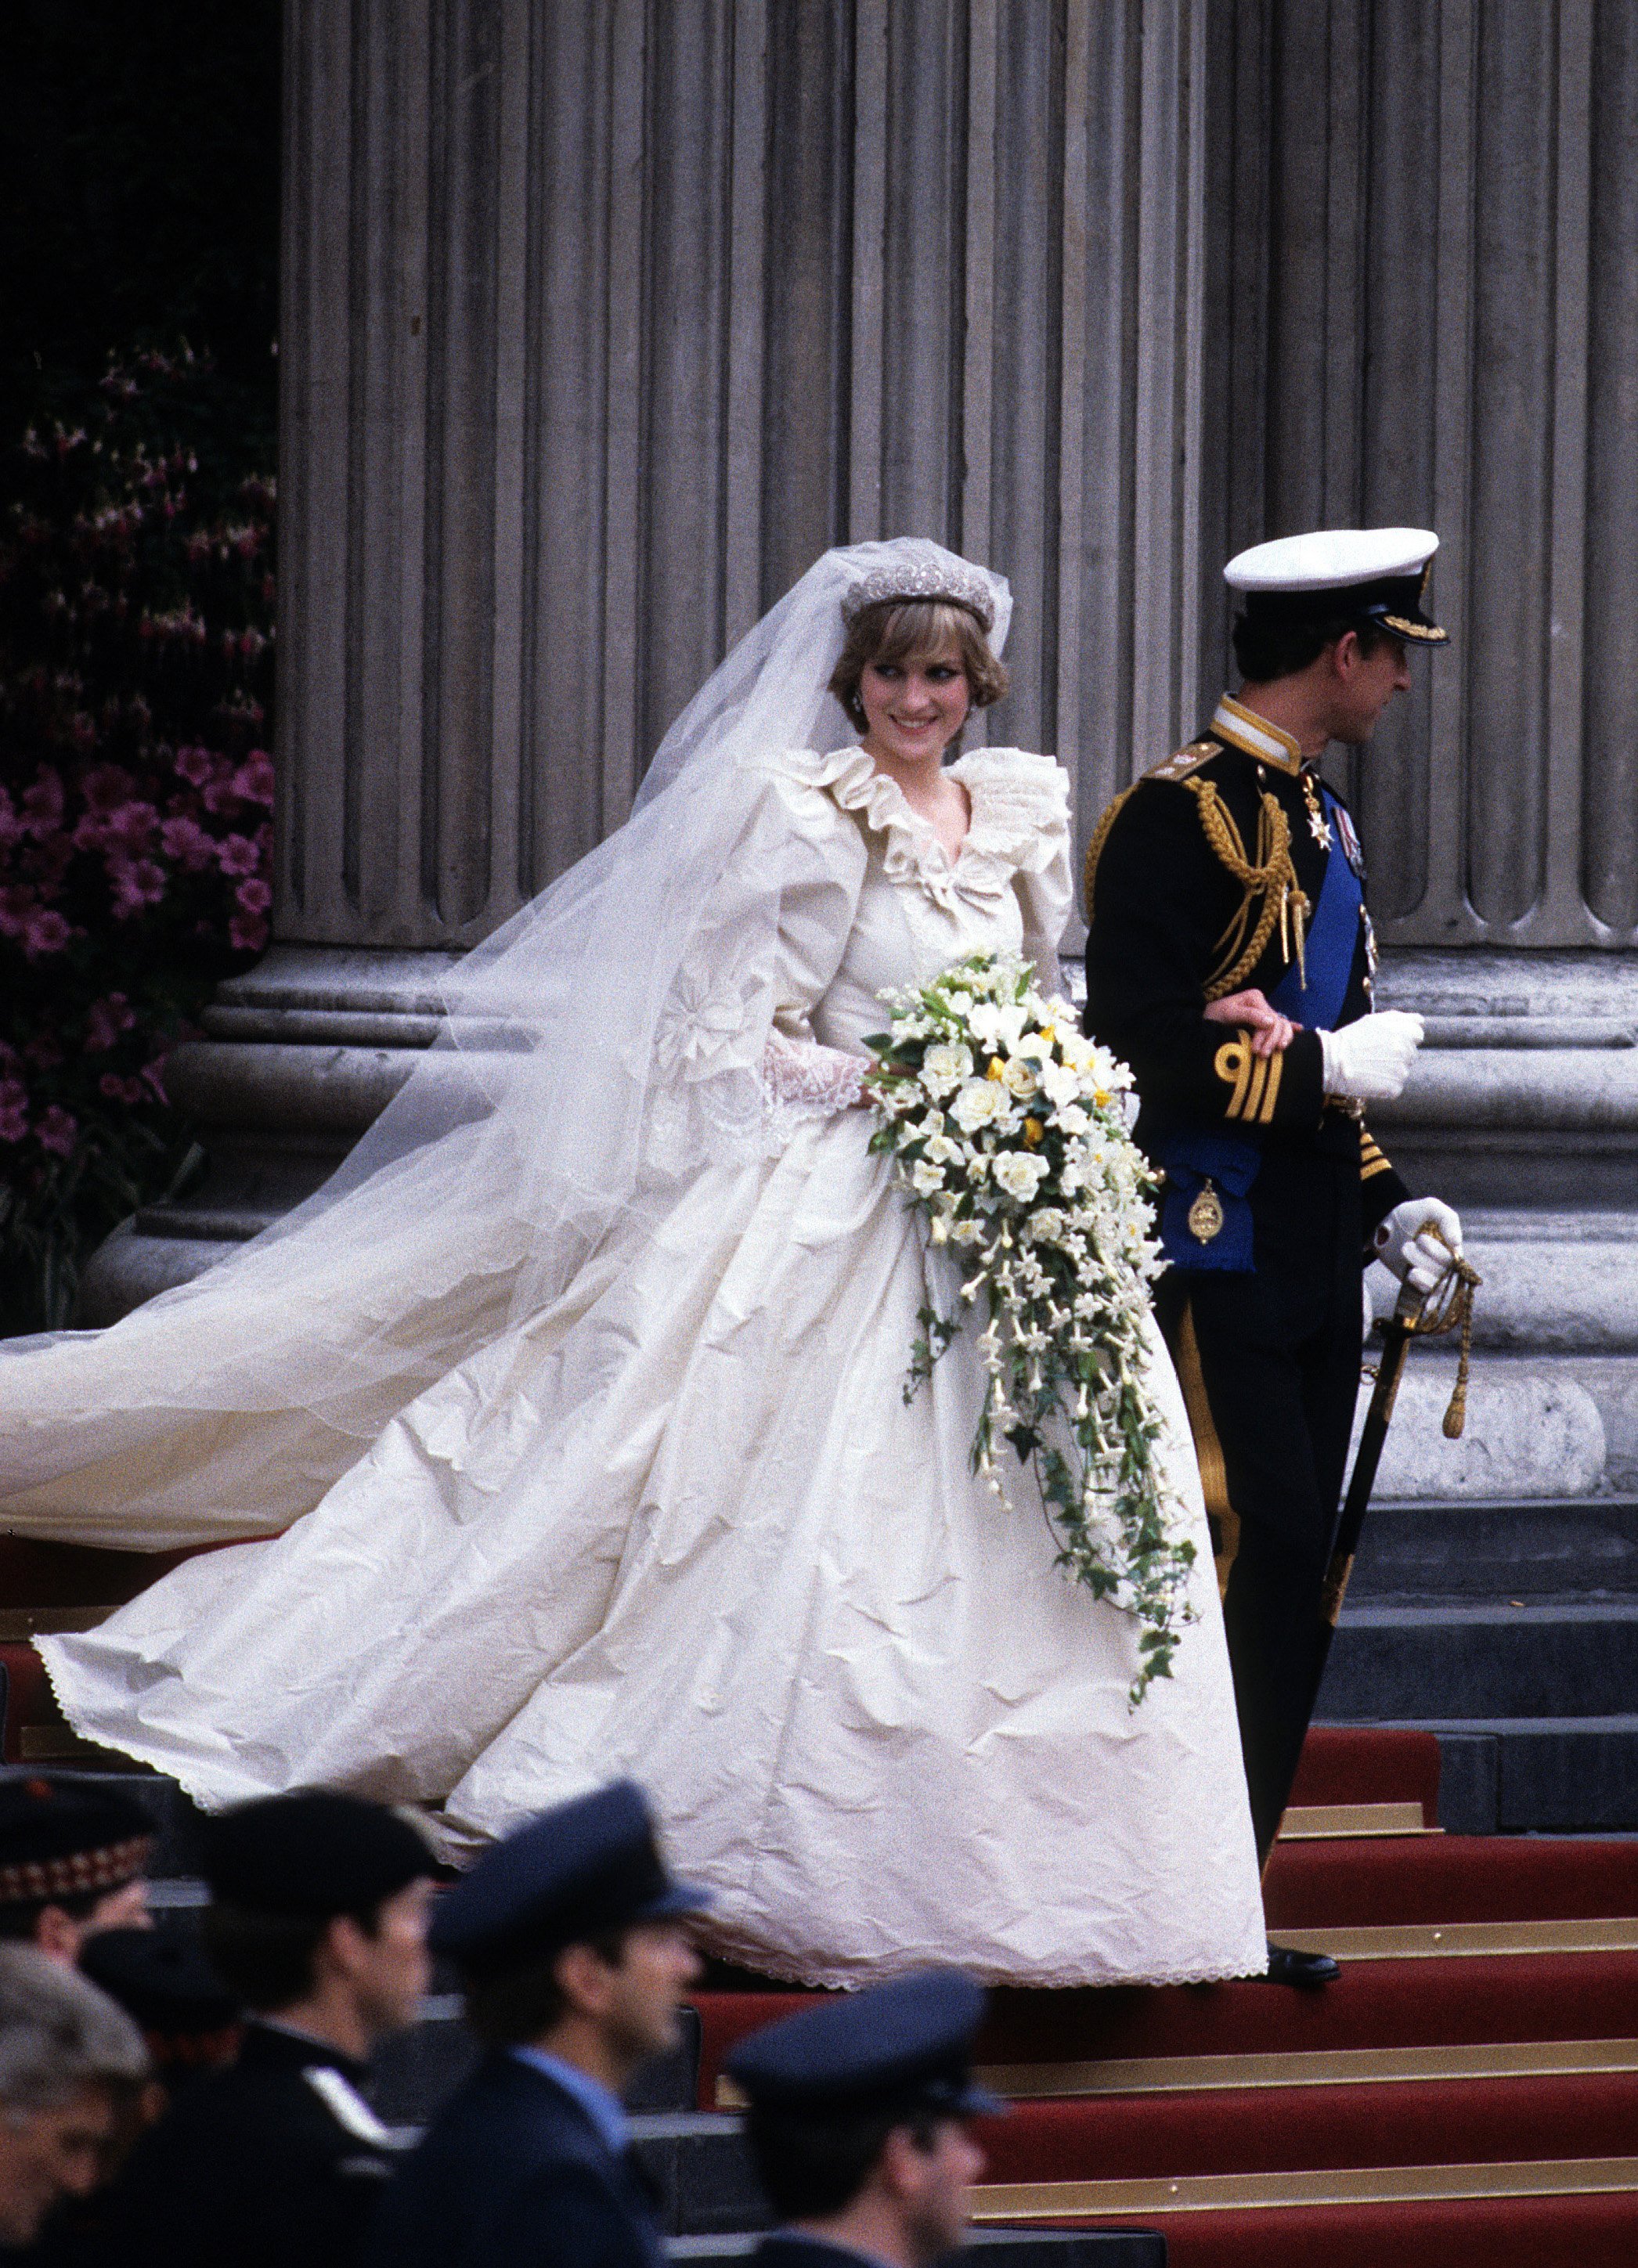 Prince Charles and Diana eave St. Paul's Cathedral following their wedding on July 29, 1981 in London, England. | Source: Getty Images